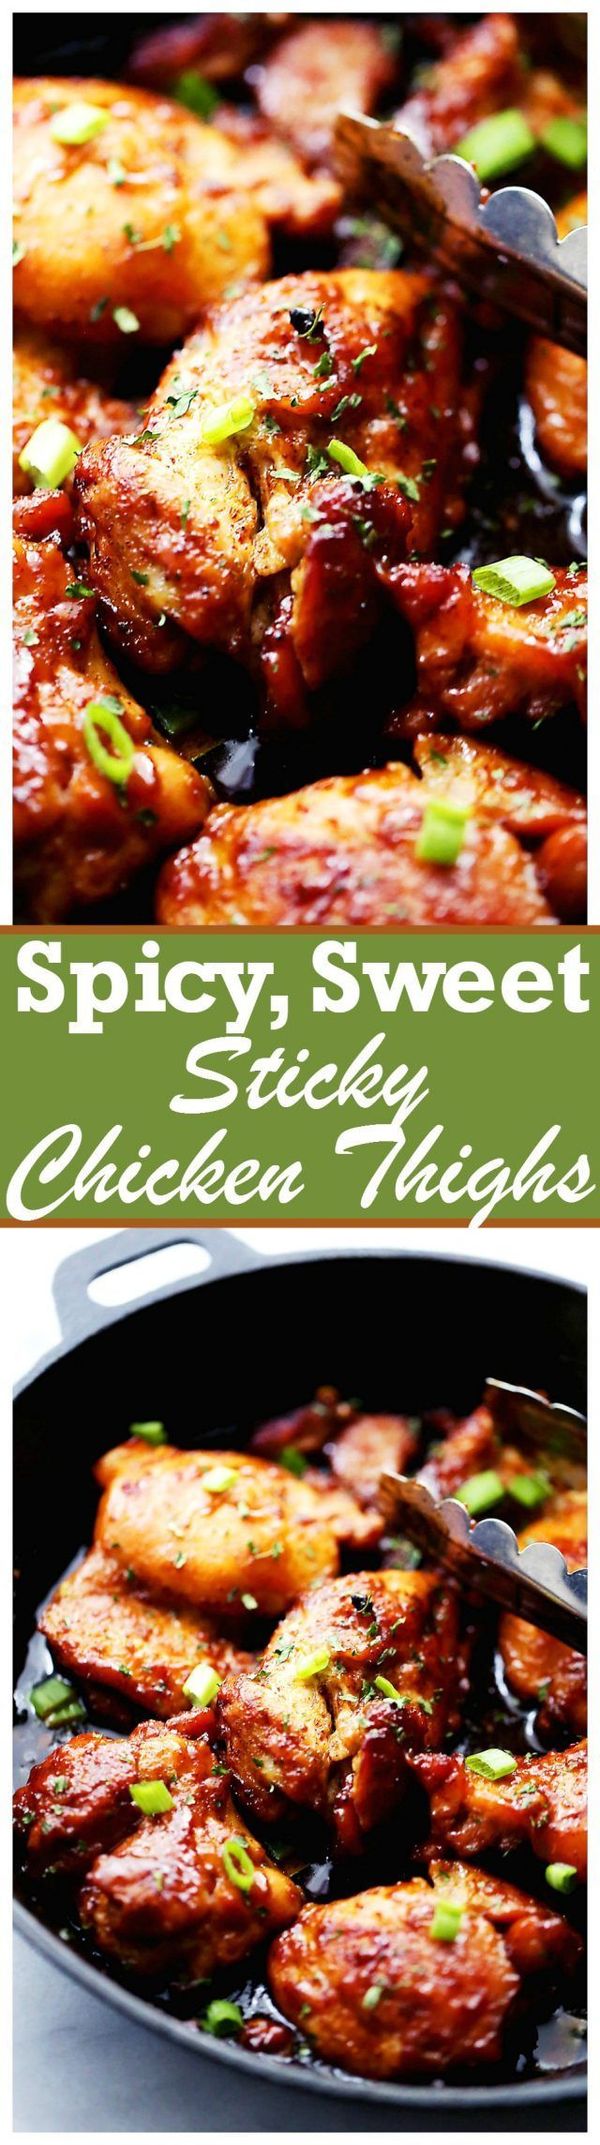 Spicy, Sweet and Sticky Chicken Thighs